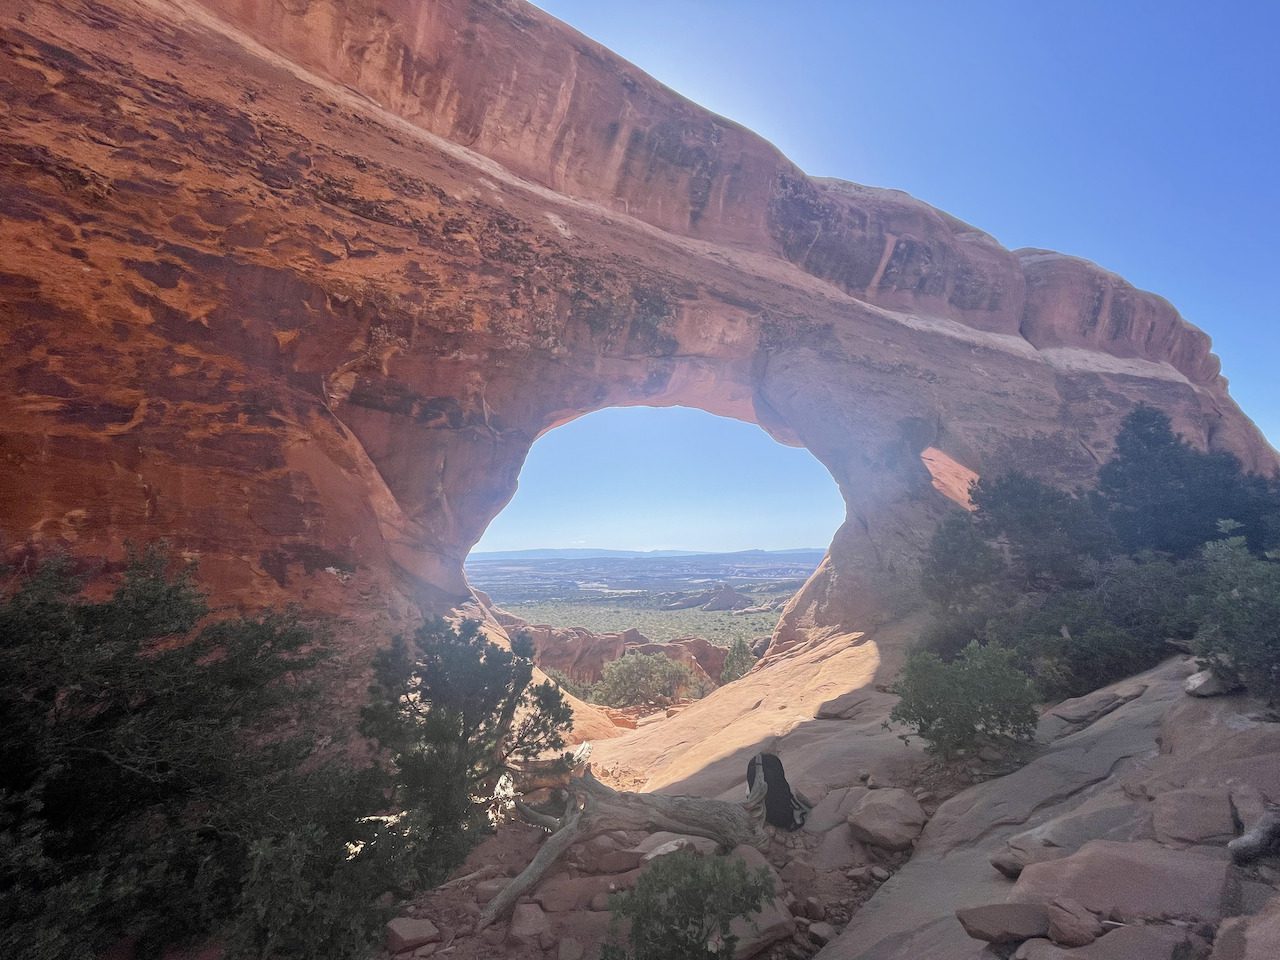 Best Arche In Arches National Park The Partition Arch